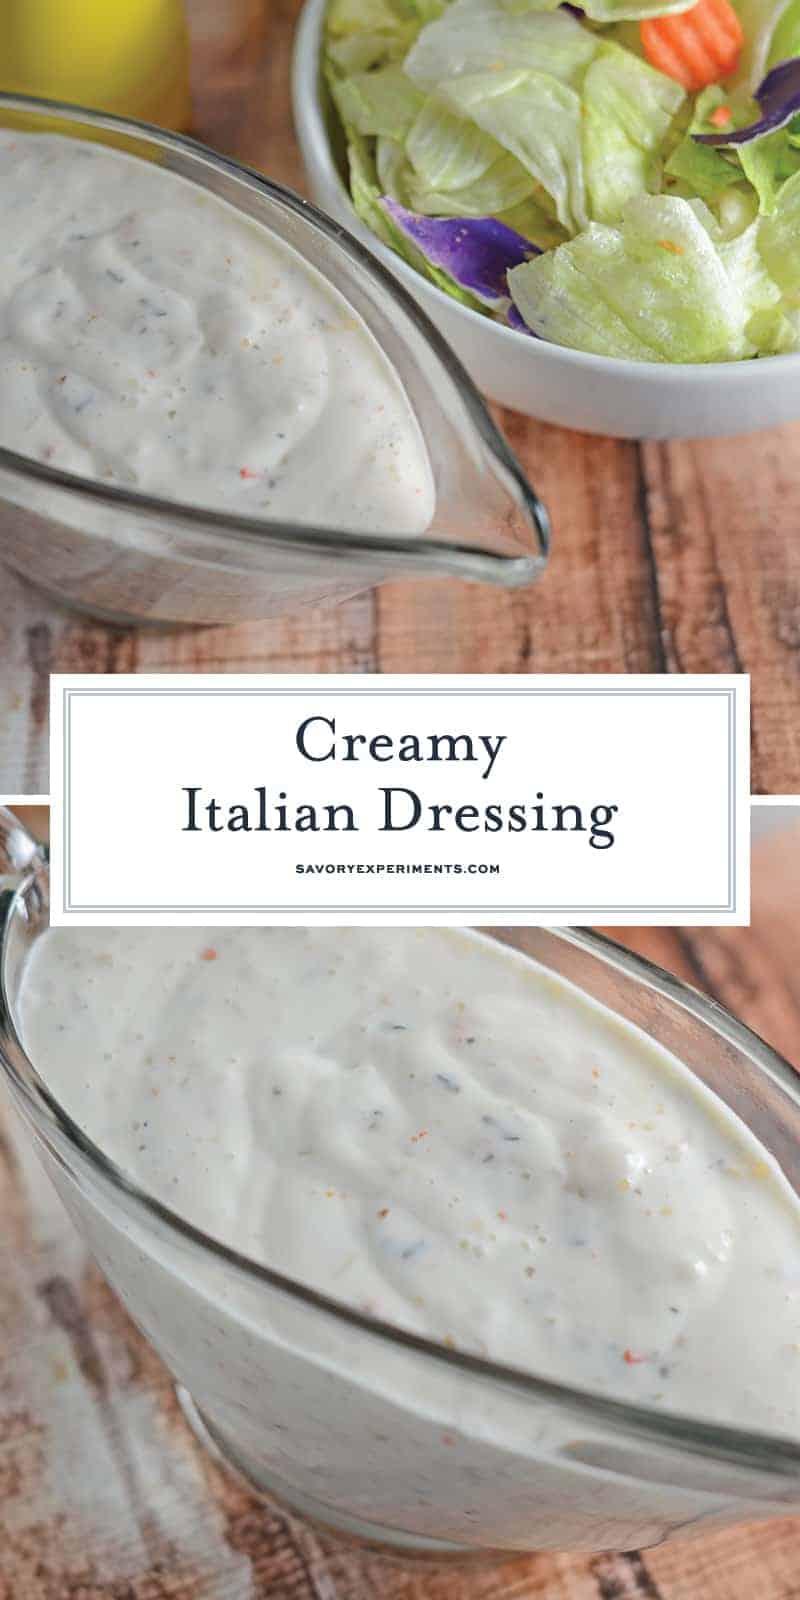  Creamy Italian Dressing a creamy, zesty Italian dressing that you will fall in love with. In 10 minutes or less you can have a homemade Italian dressing. #homemadeitaliandressing #creamyitaliandressing #italiandressingrecipe www.savoryexperiments.com 